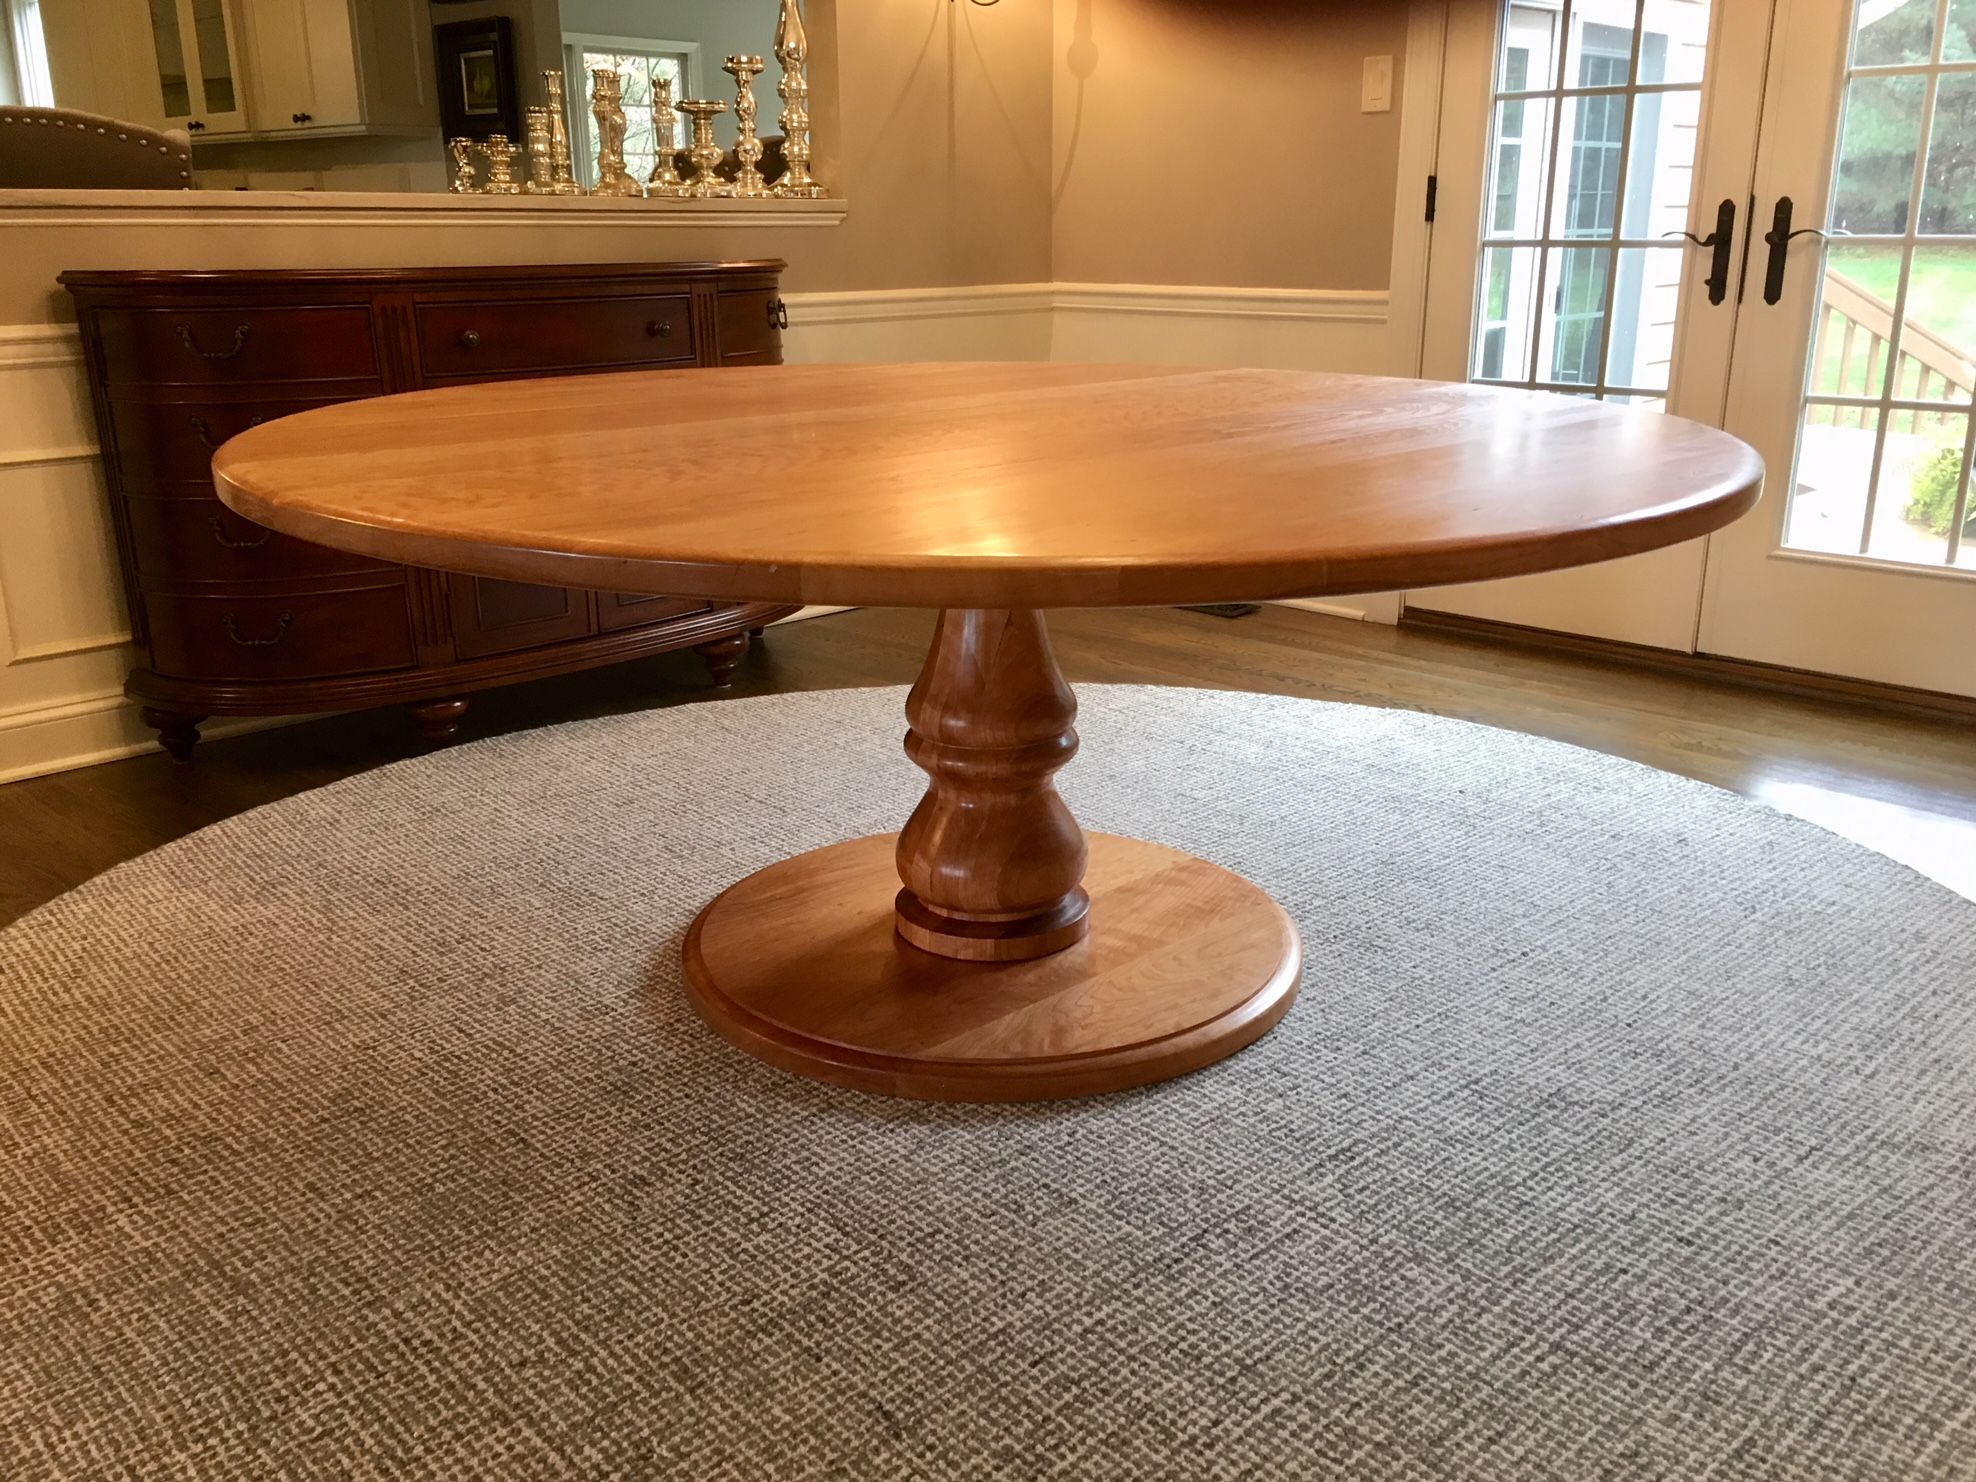 Handmade Large Round Pedestal Dining Table With Turned Base - Solid